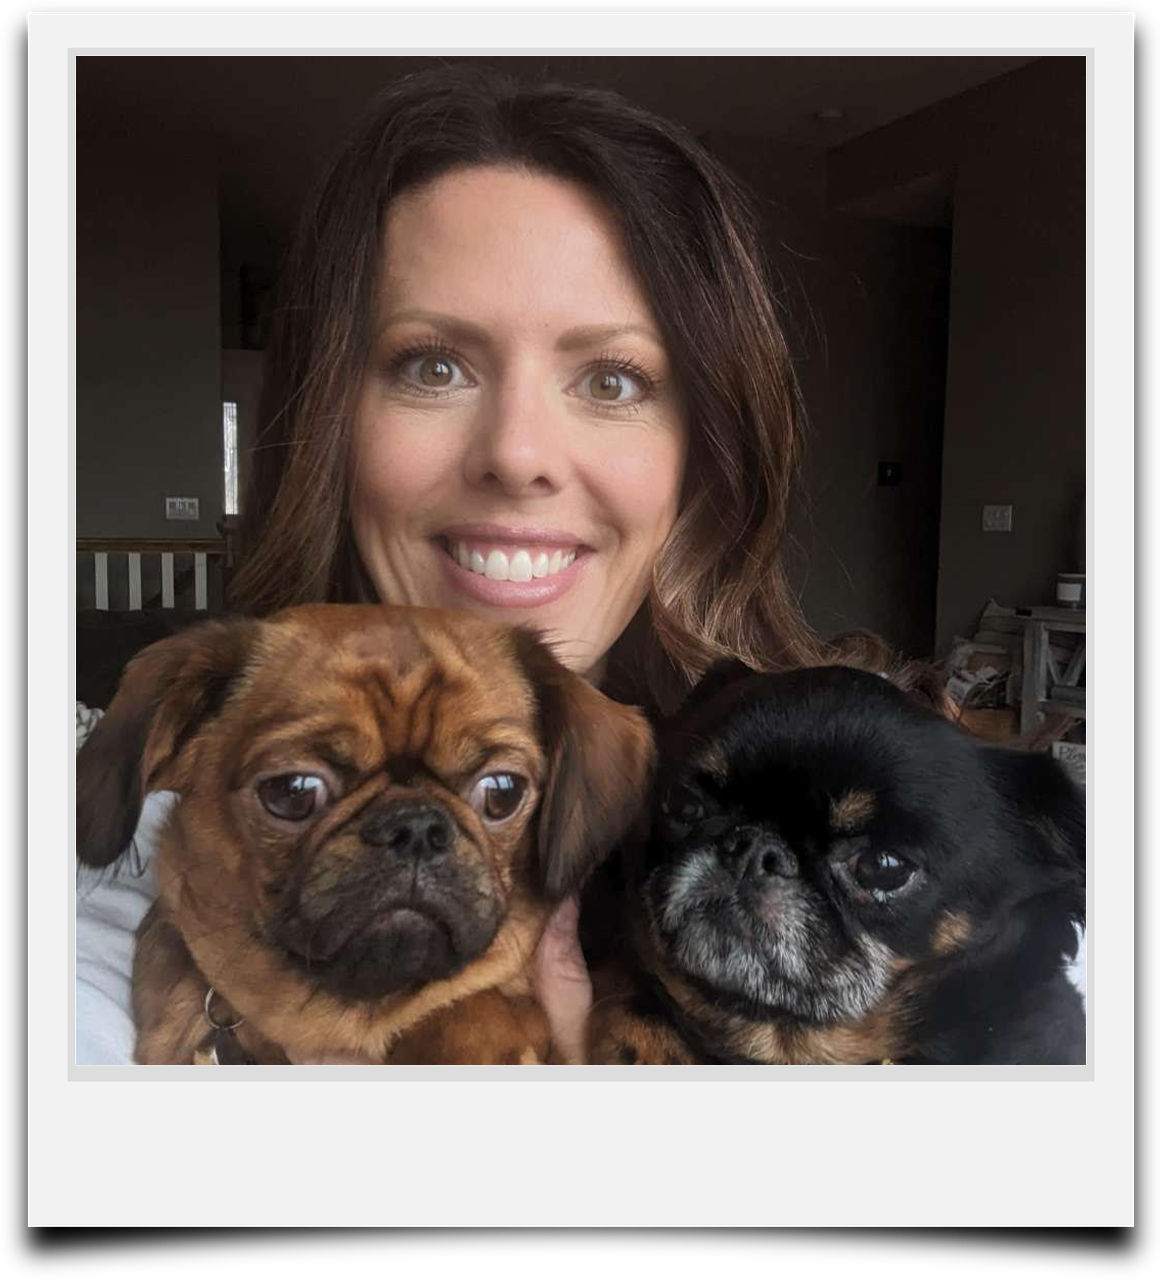 Angie - Auntie Abyby's Professional Pet Sitting Caregiver. Angie is pictured with two of her dogs, Brussel Griffons.